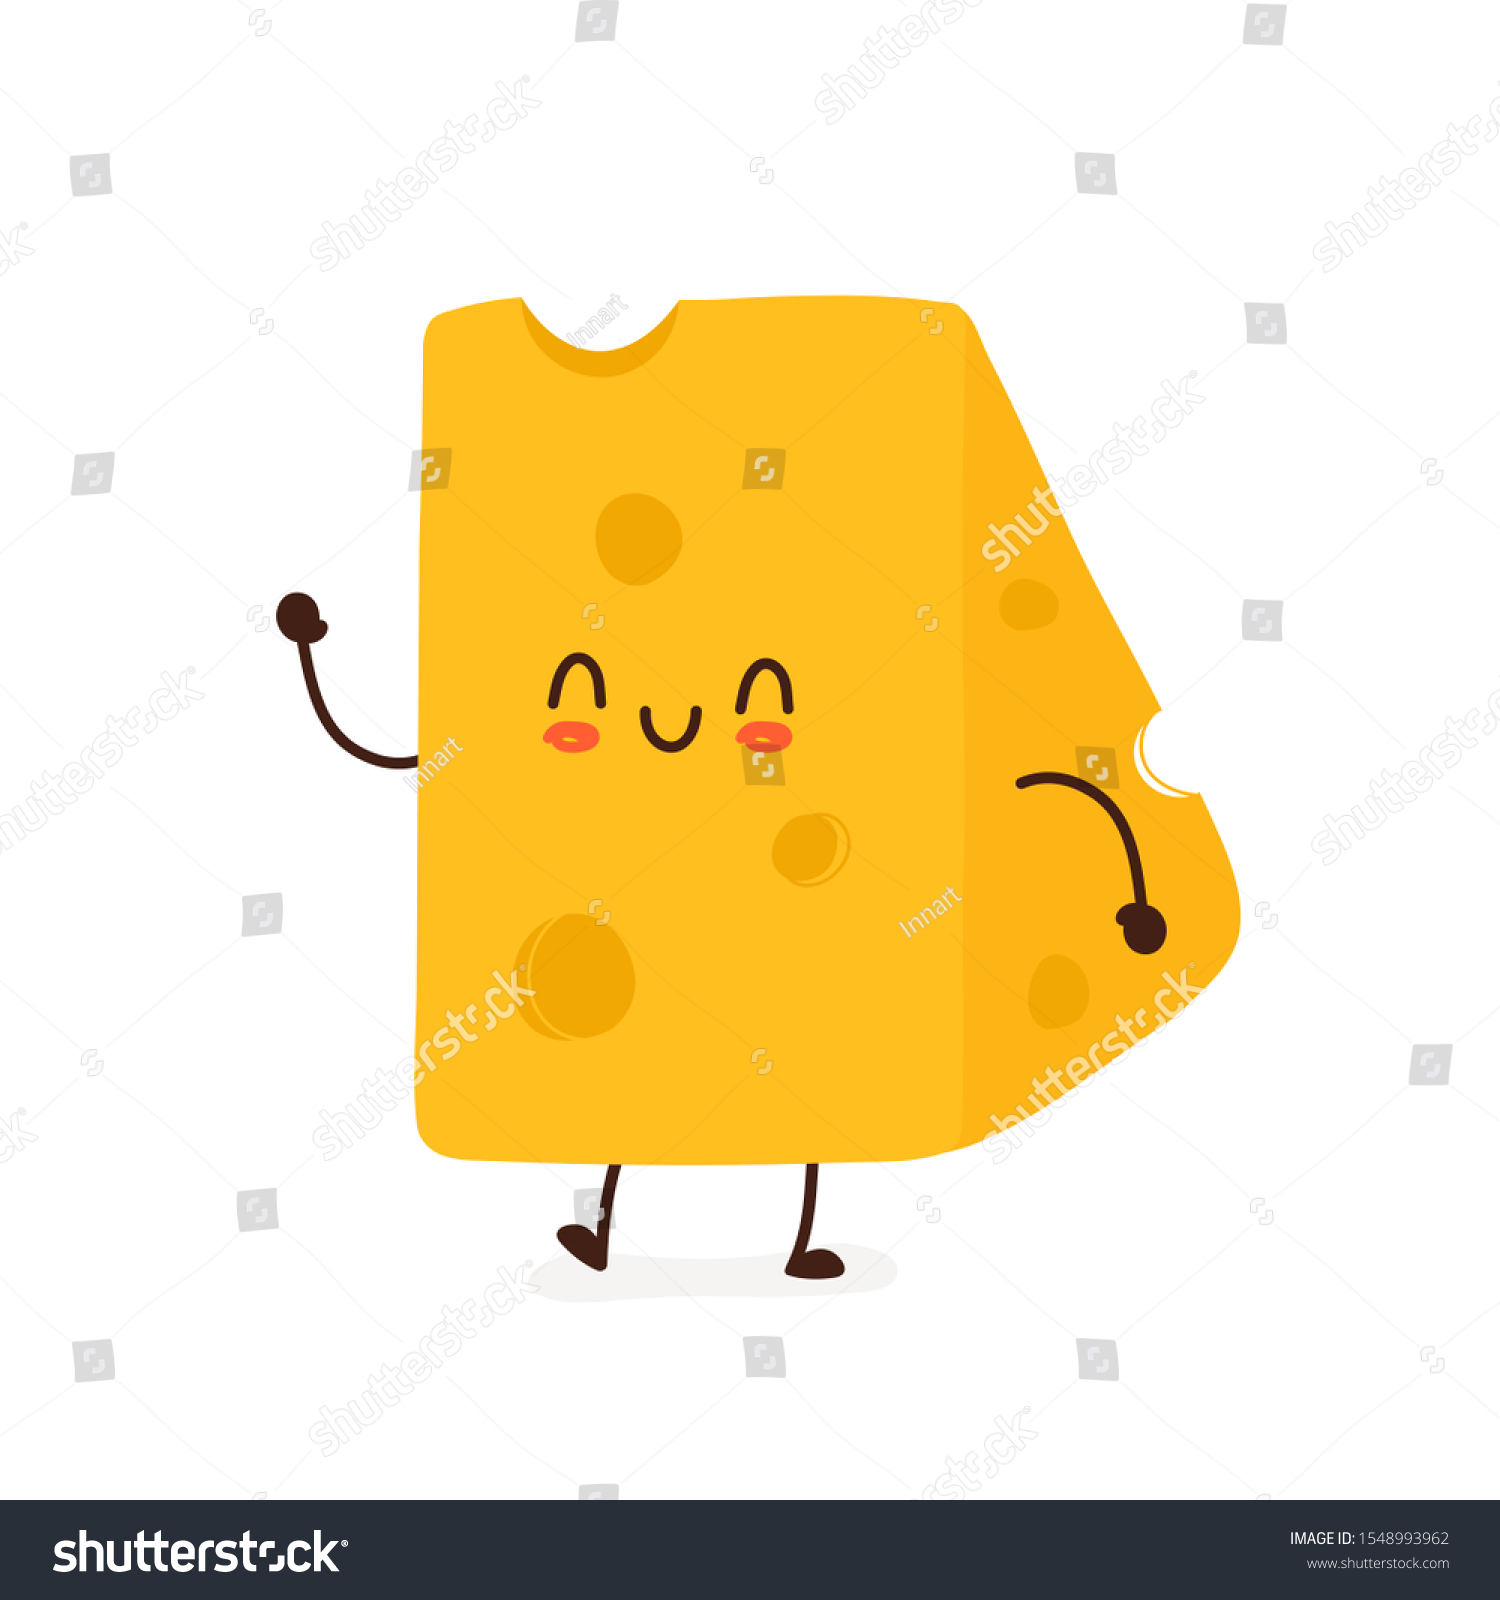 SVG of Happy smiling funny cute cheese. Vector flat cartoon character illustration icon design. Isolated on white background.  svg